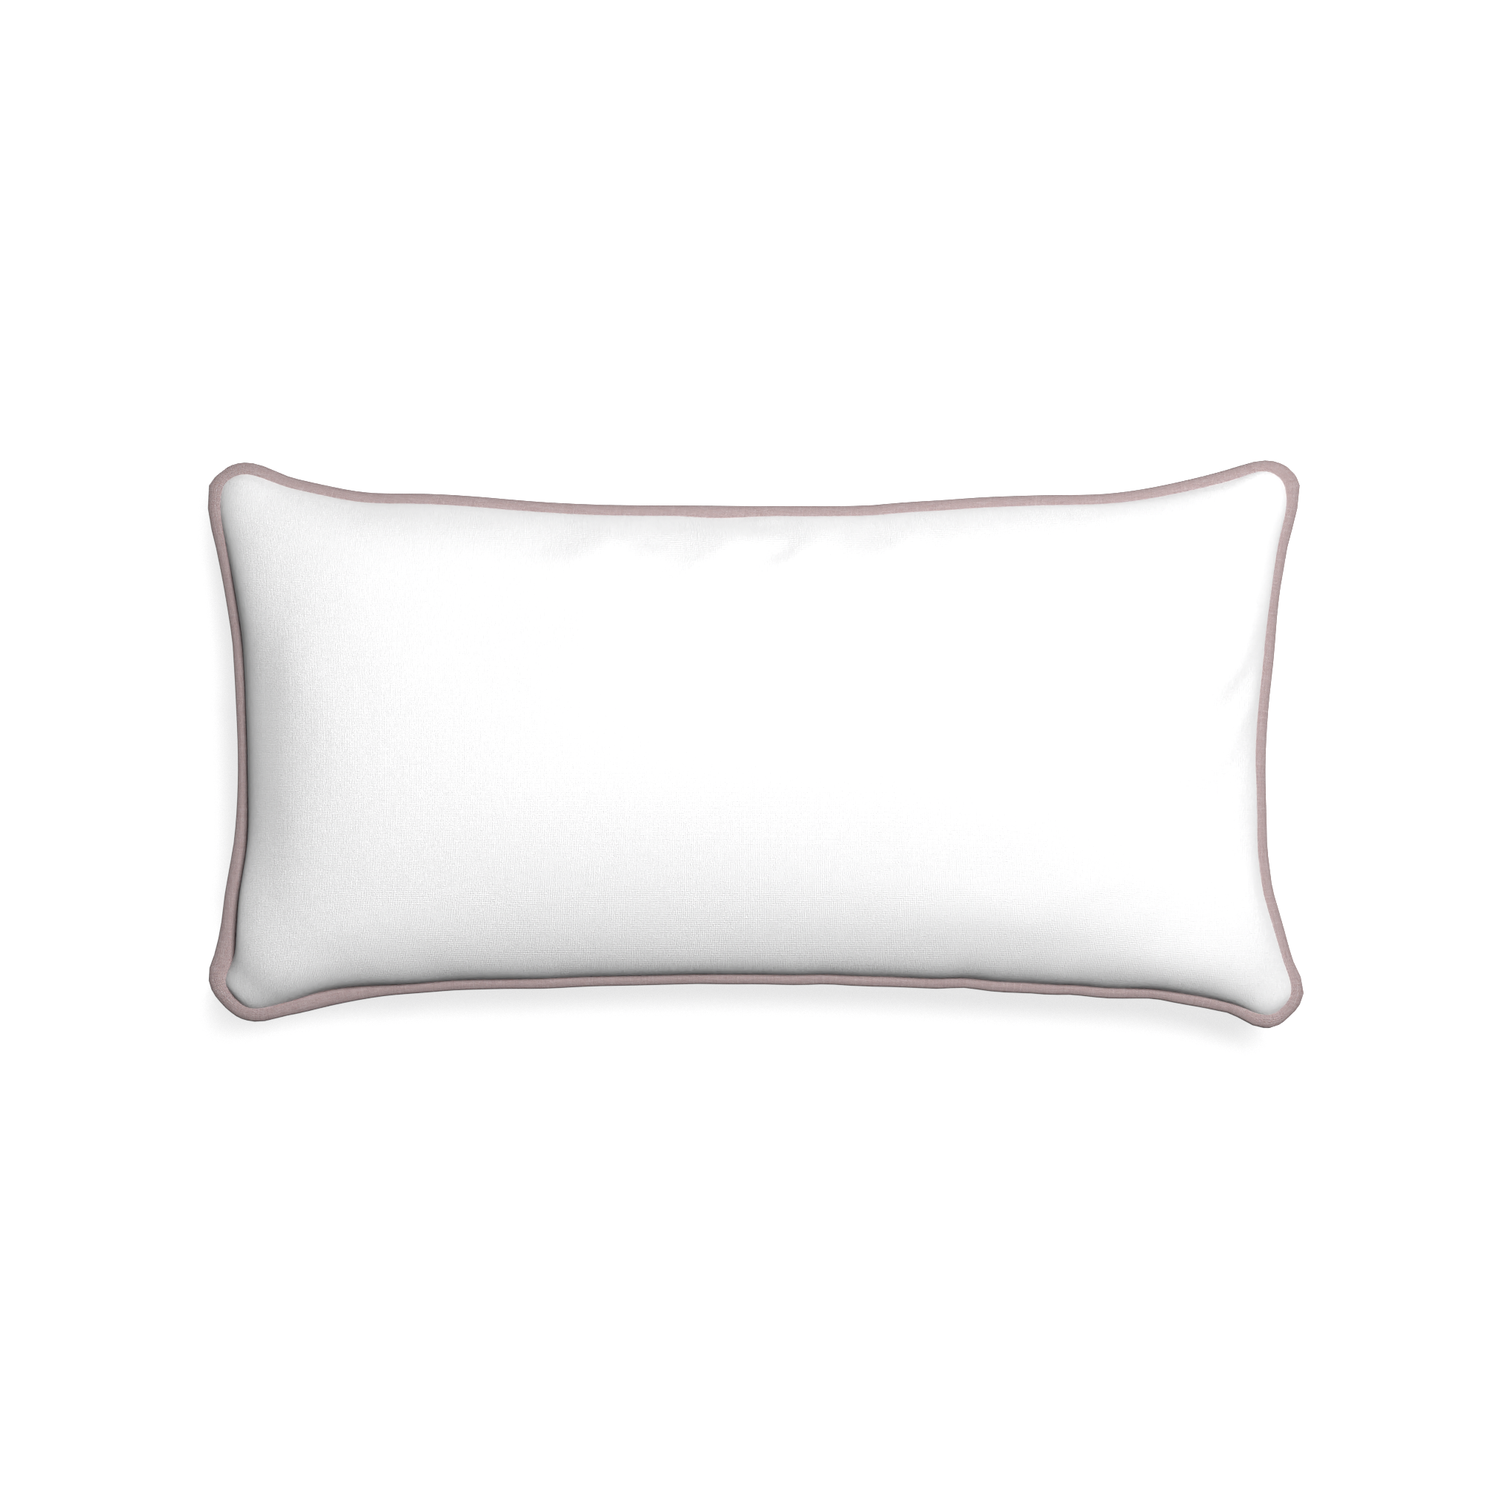 Midi-lumbar snow custom white cottonpillow with orchid piping on white background